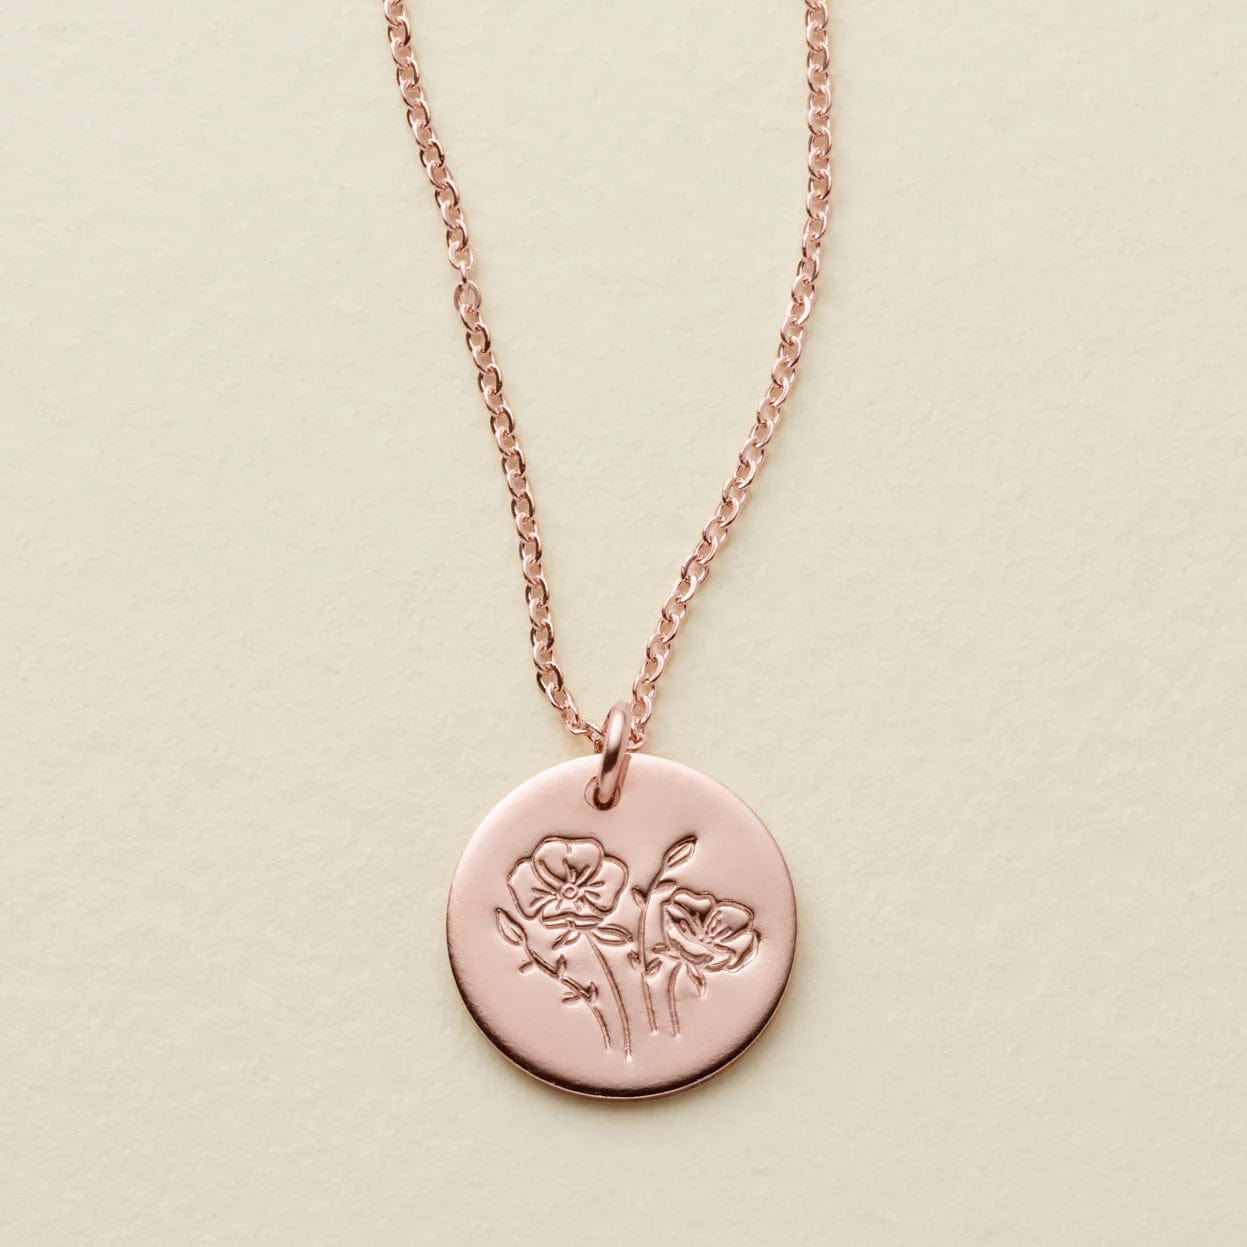 August Birth Flower Necklace Rose Gold FIlled / 1/2" / 16"-18" Necklace